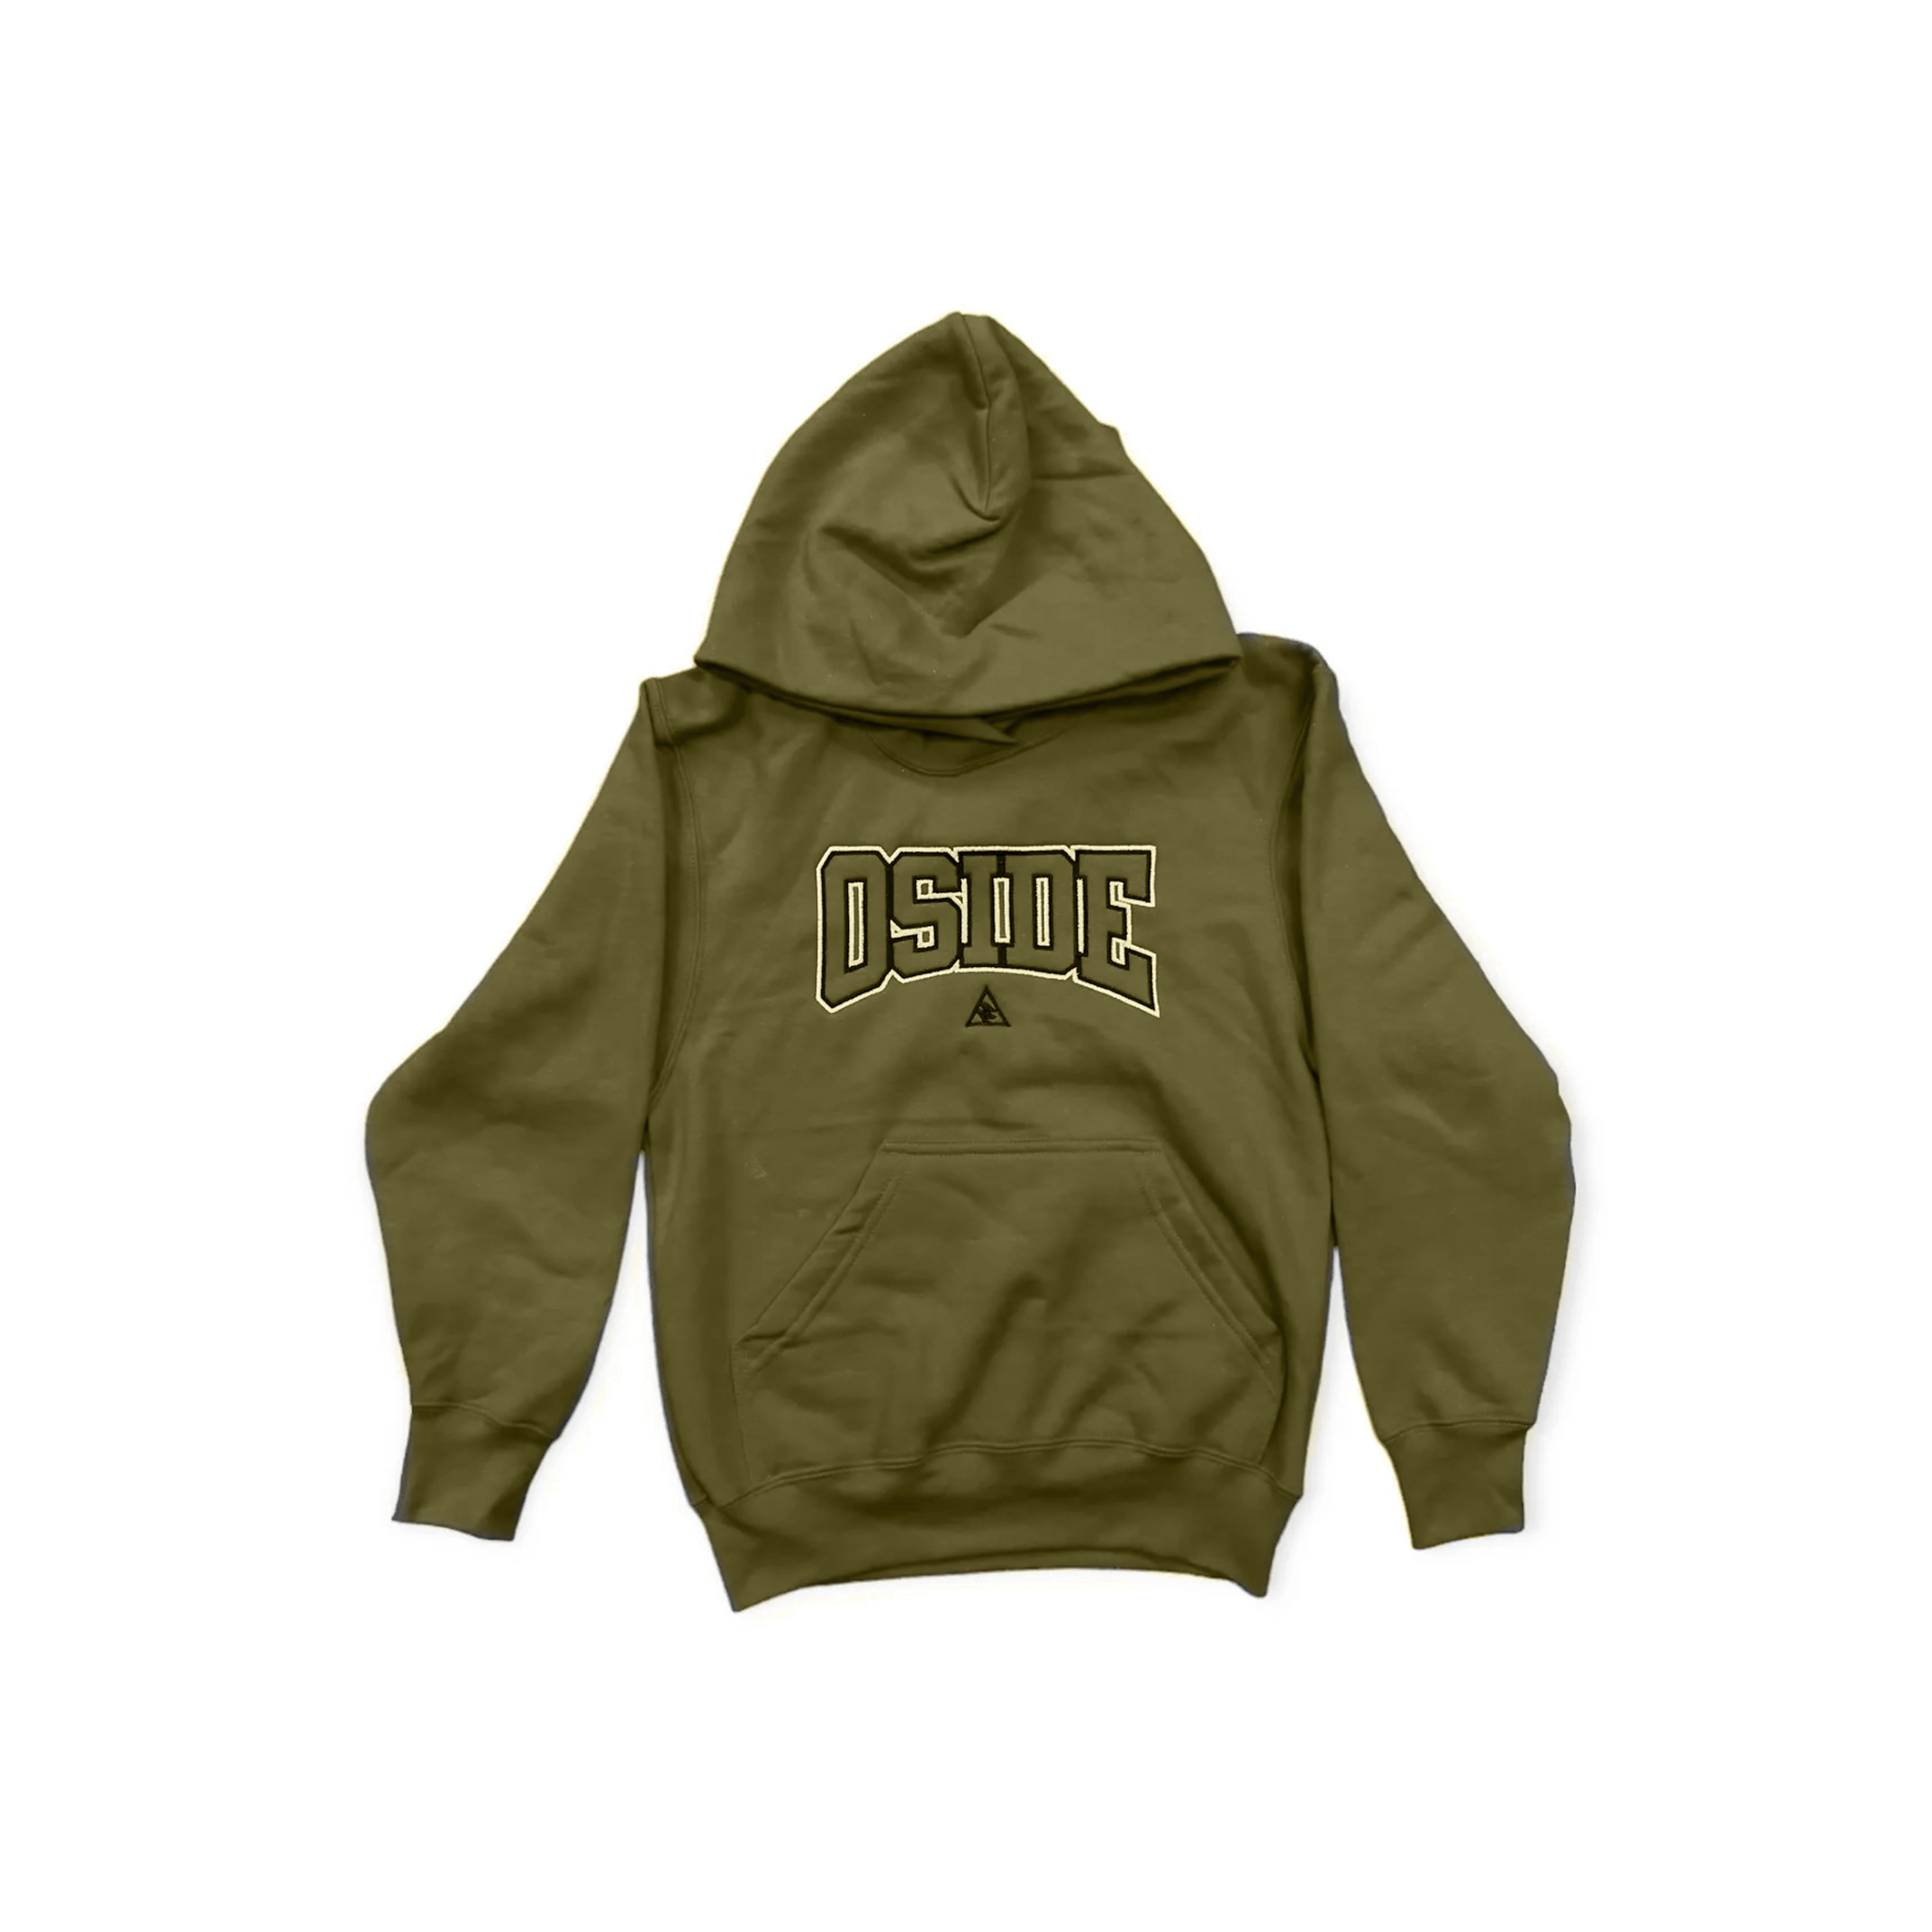 Oside Youth Hoodie (Olive)